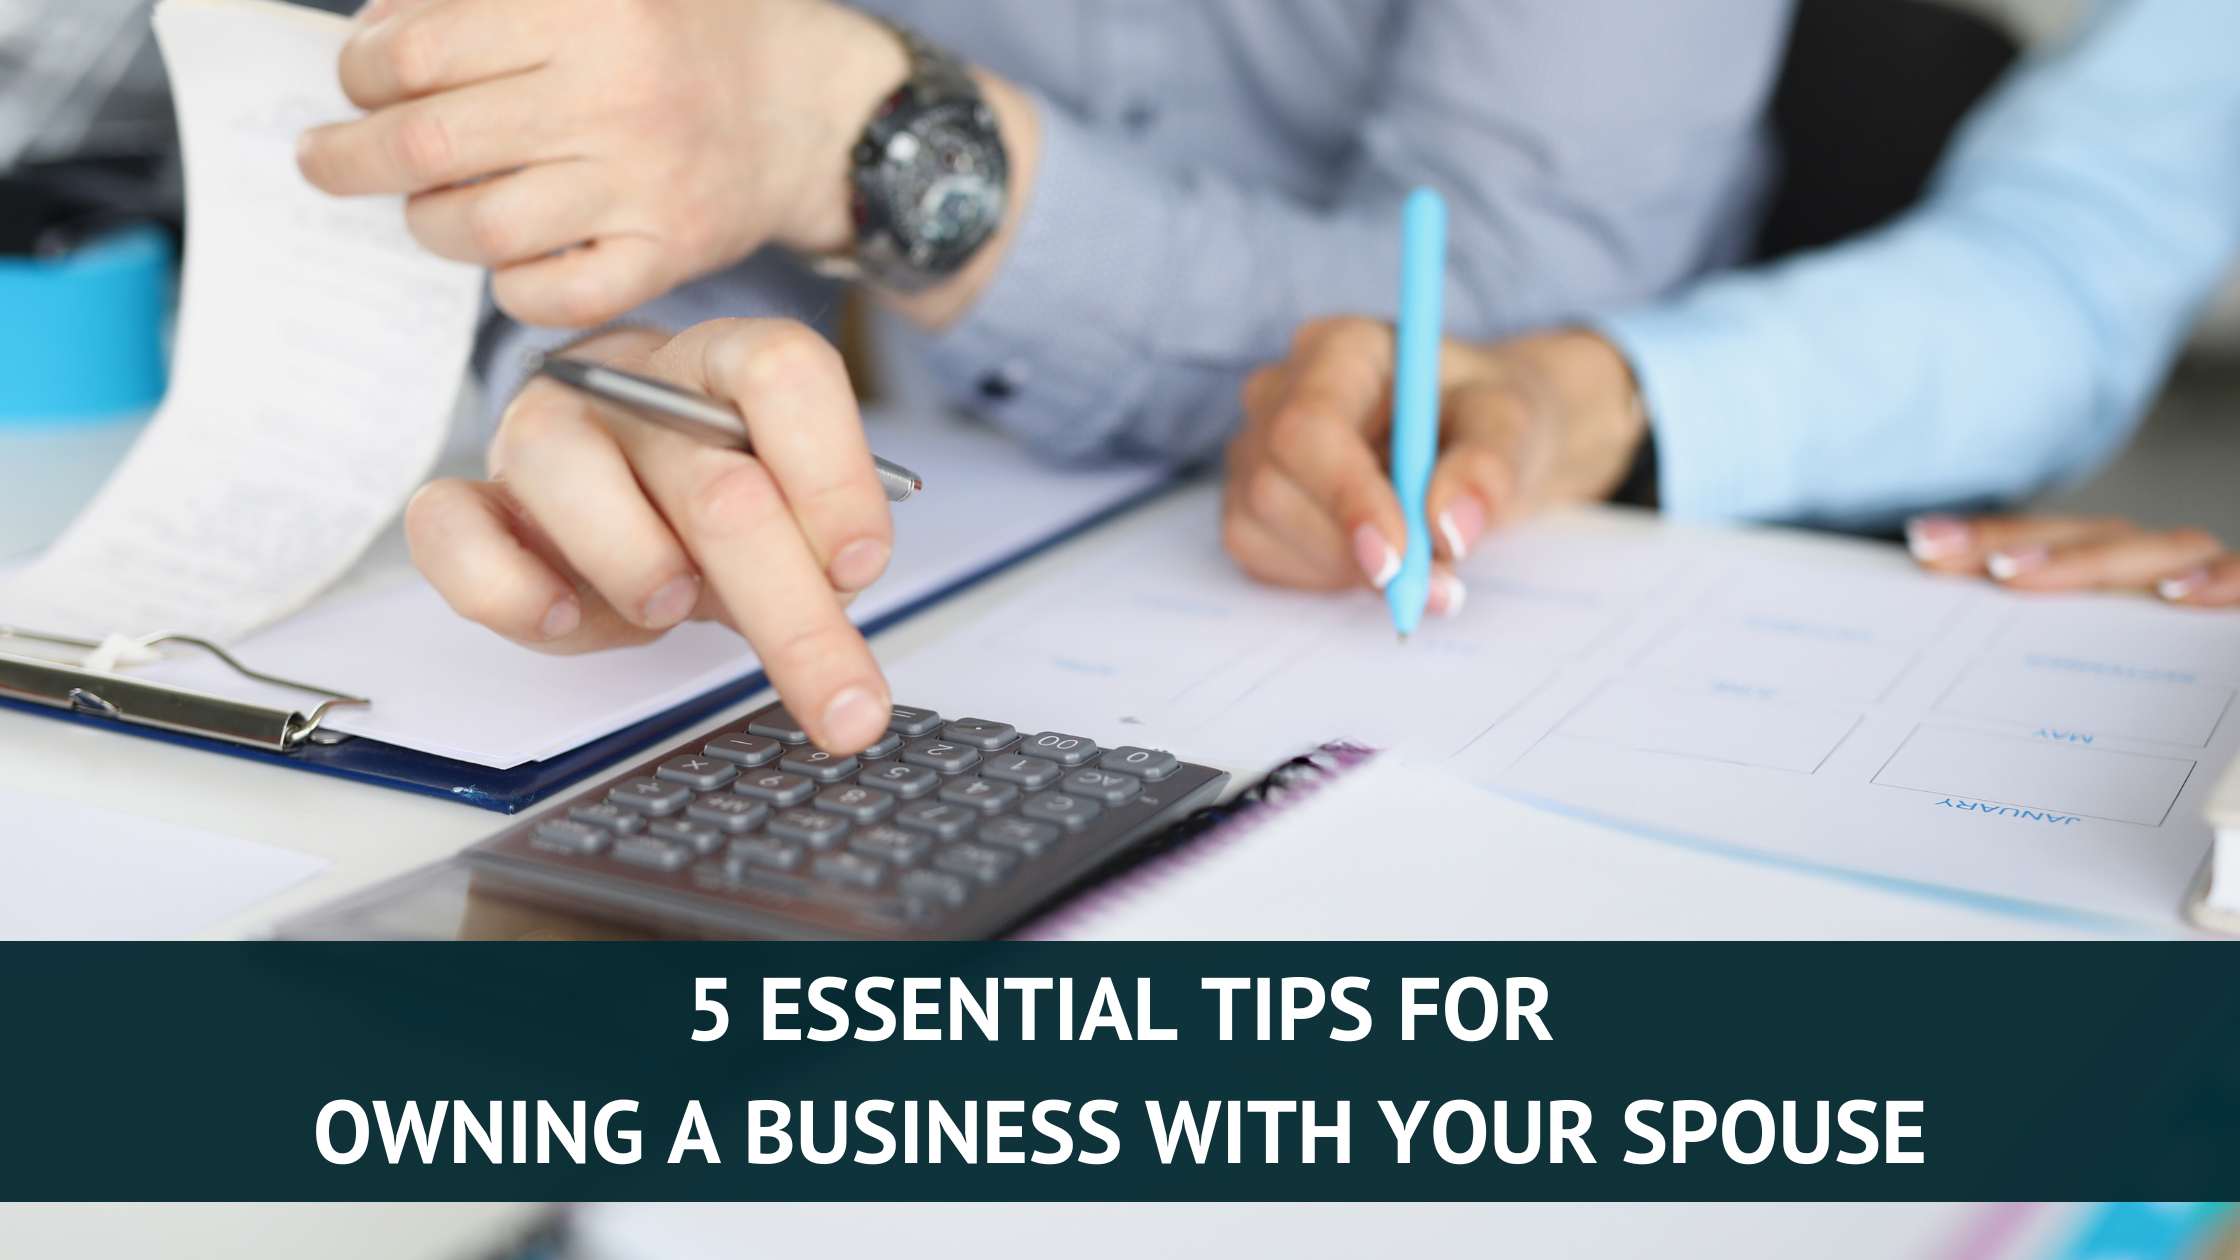 5 Essential Tips for Owning a Business with Your Spouse